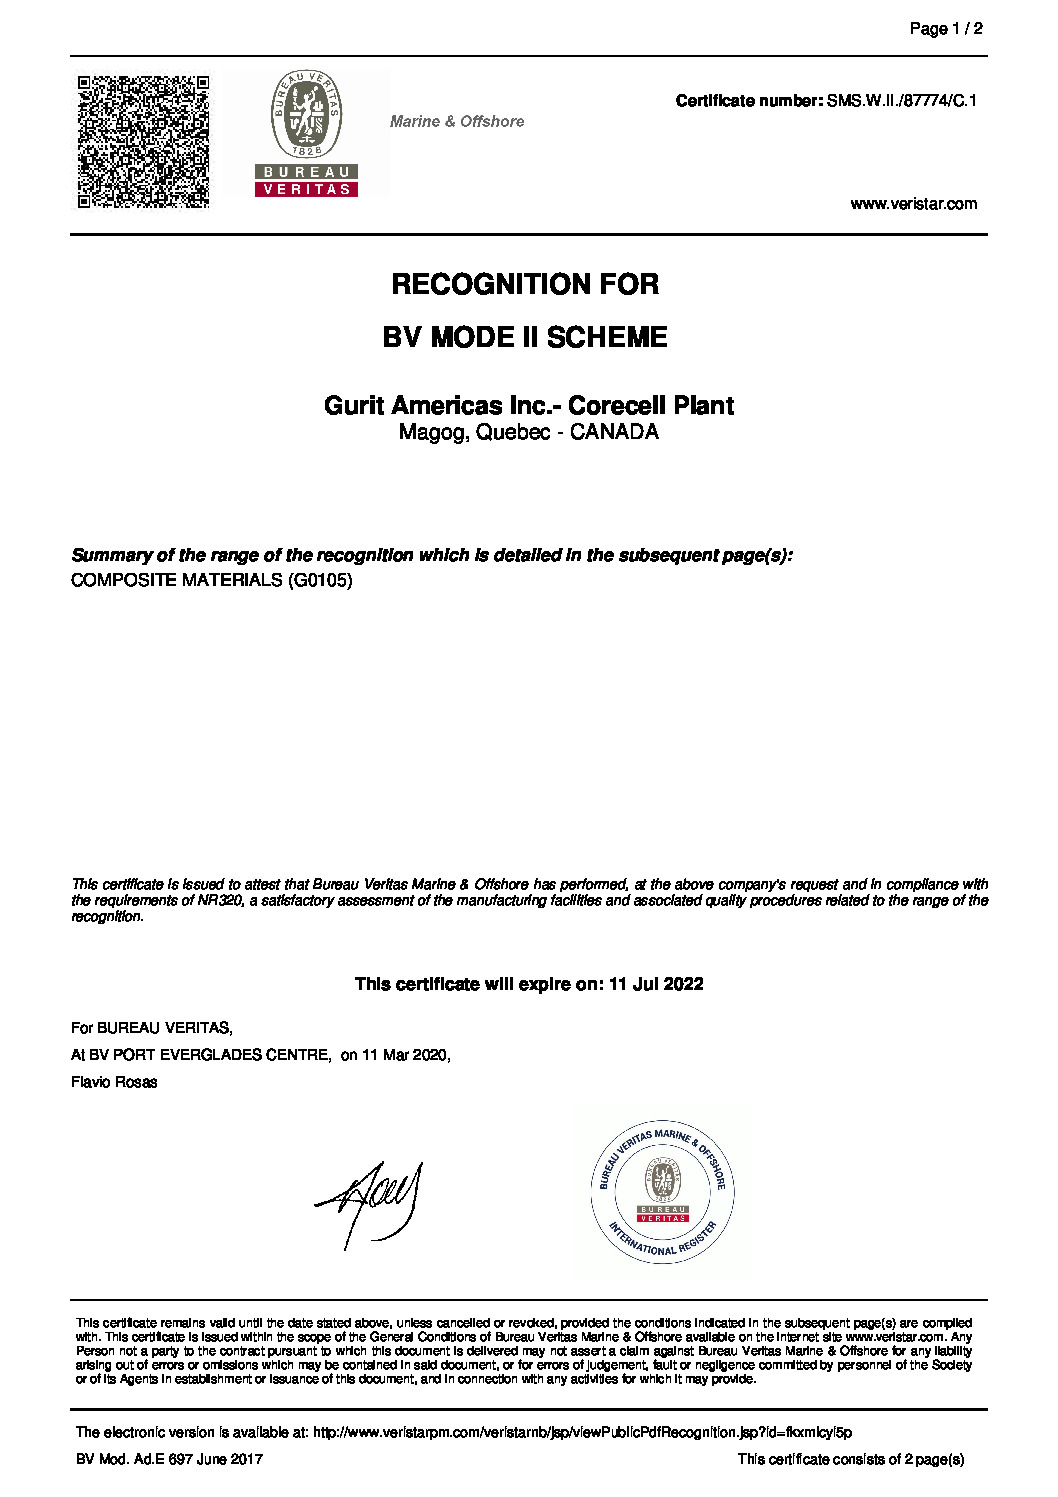 Gurit Corcell S Certificate